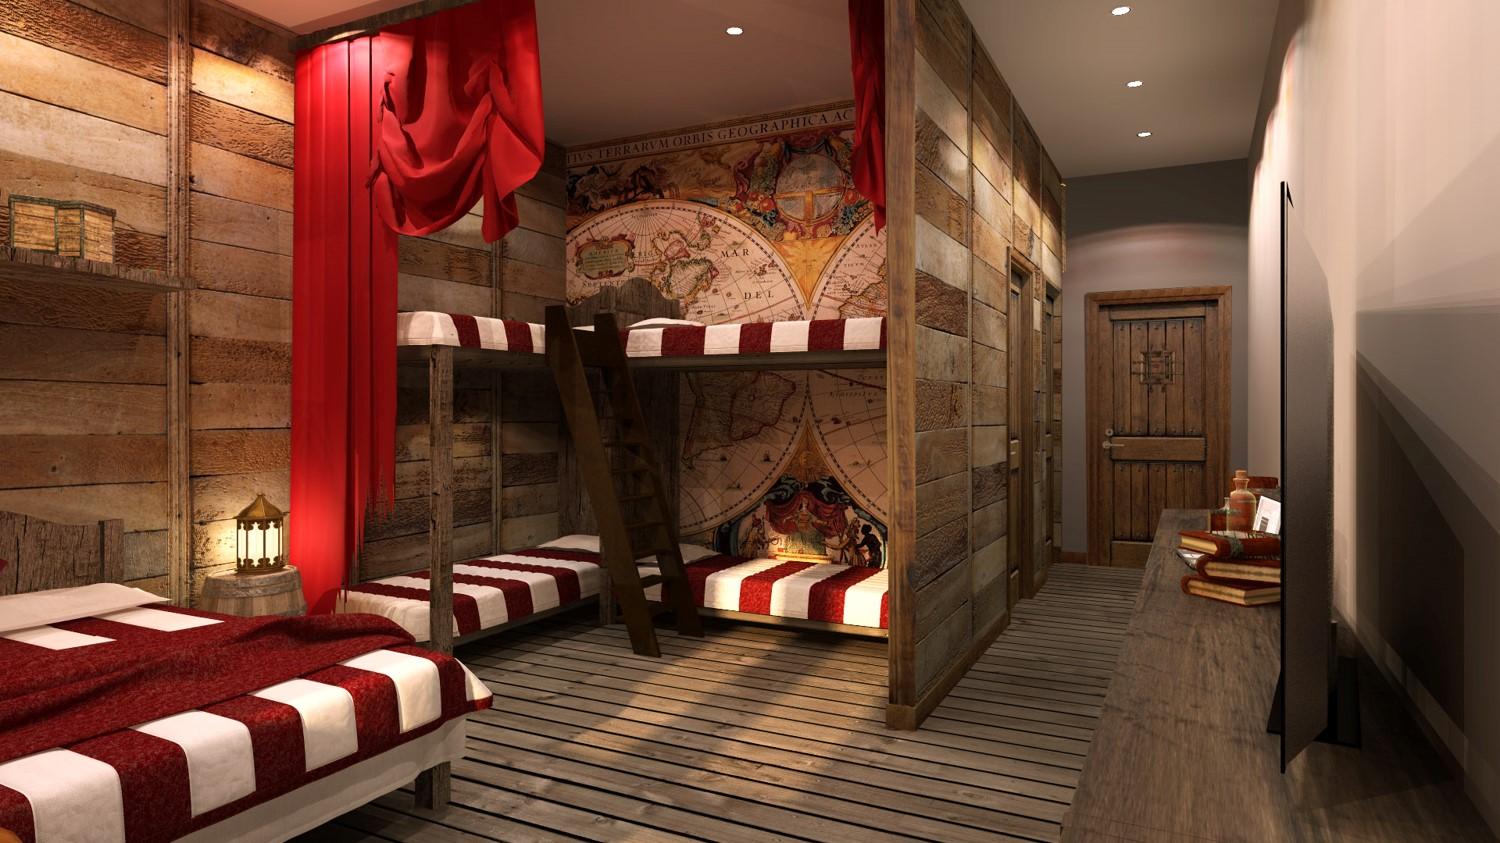 The themed hotel will target families / Liseberg